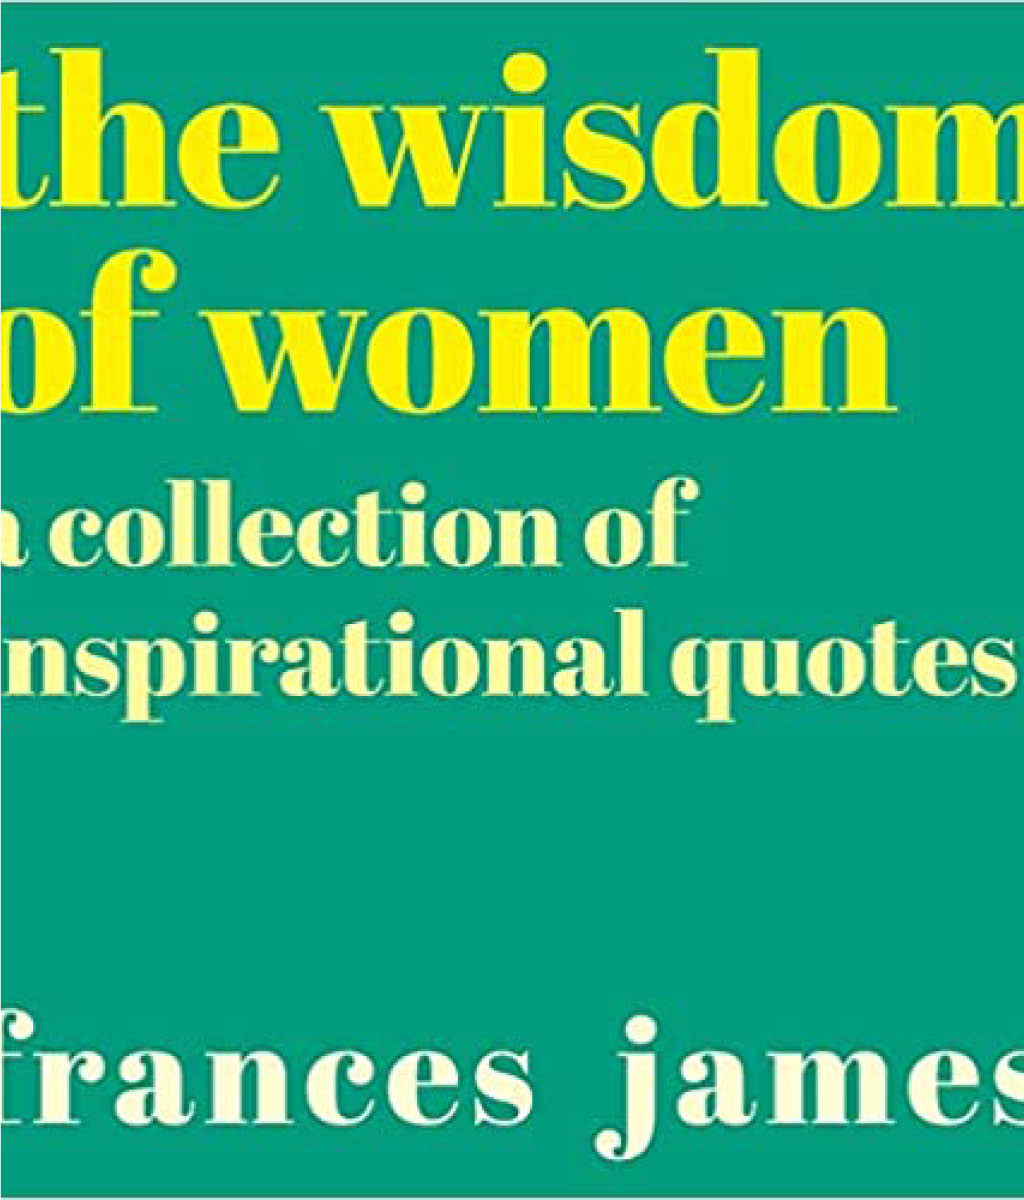 The Wisdom of Women: A Collection of Inspirational Quotes by Frances James